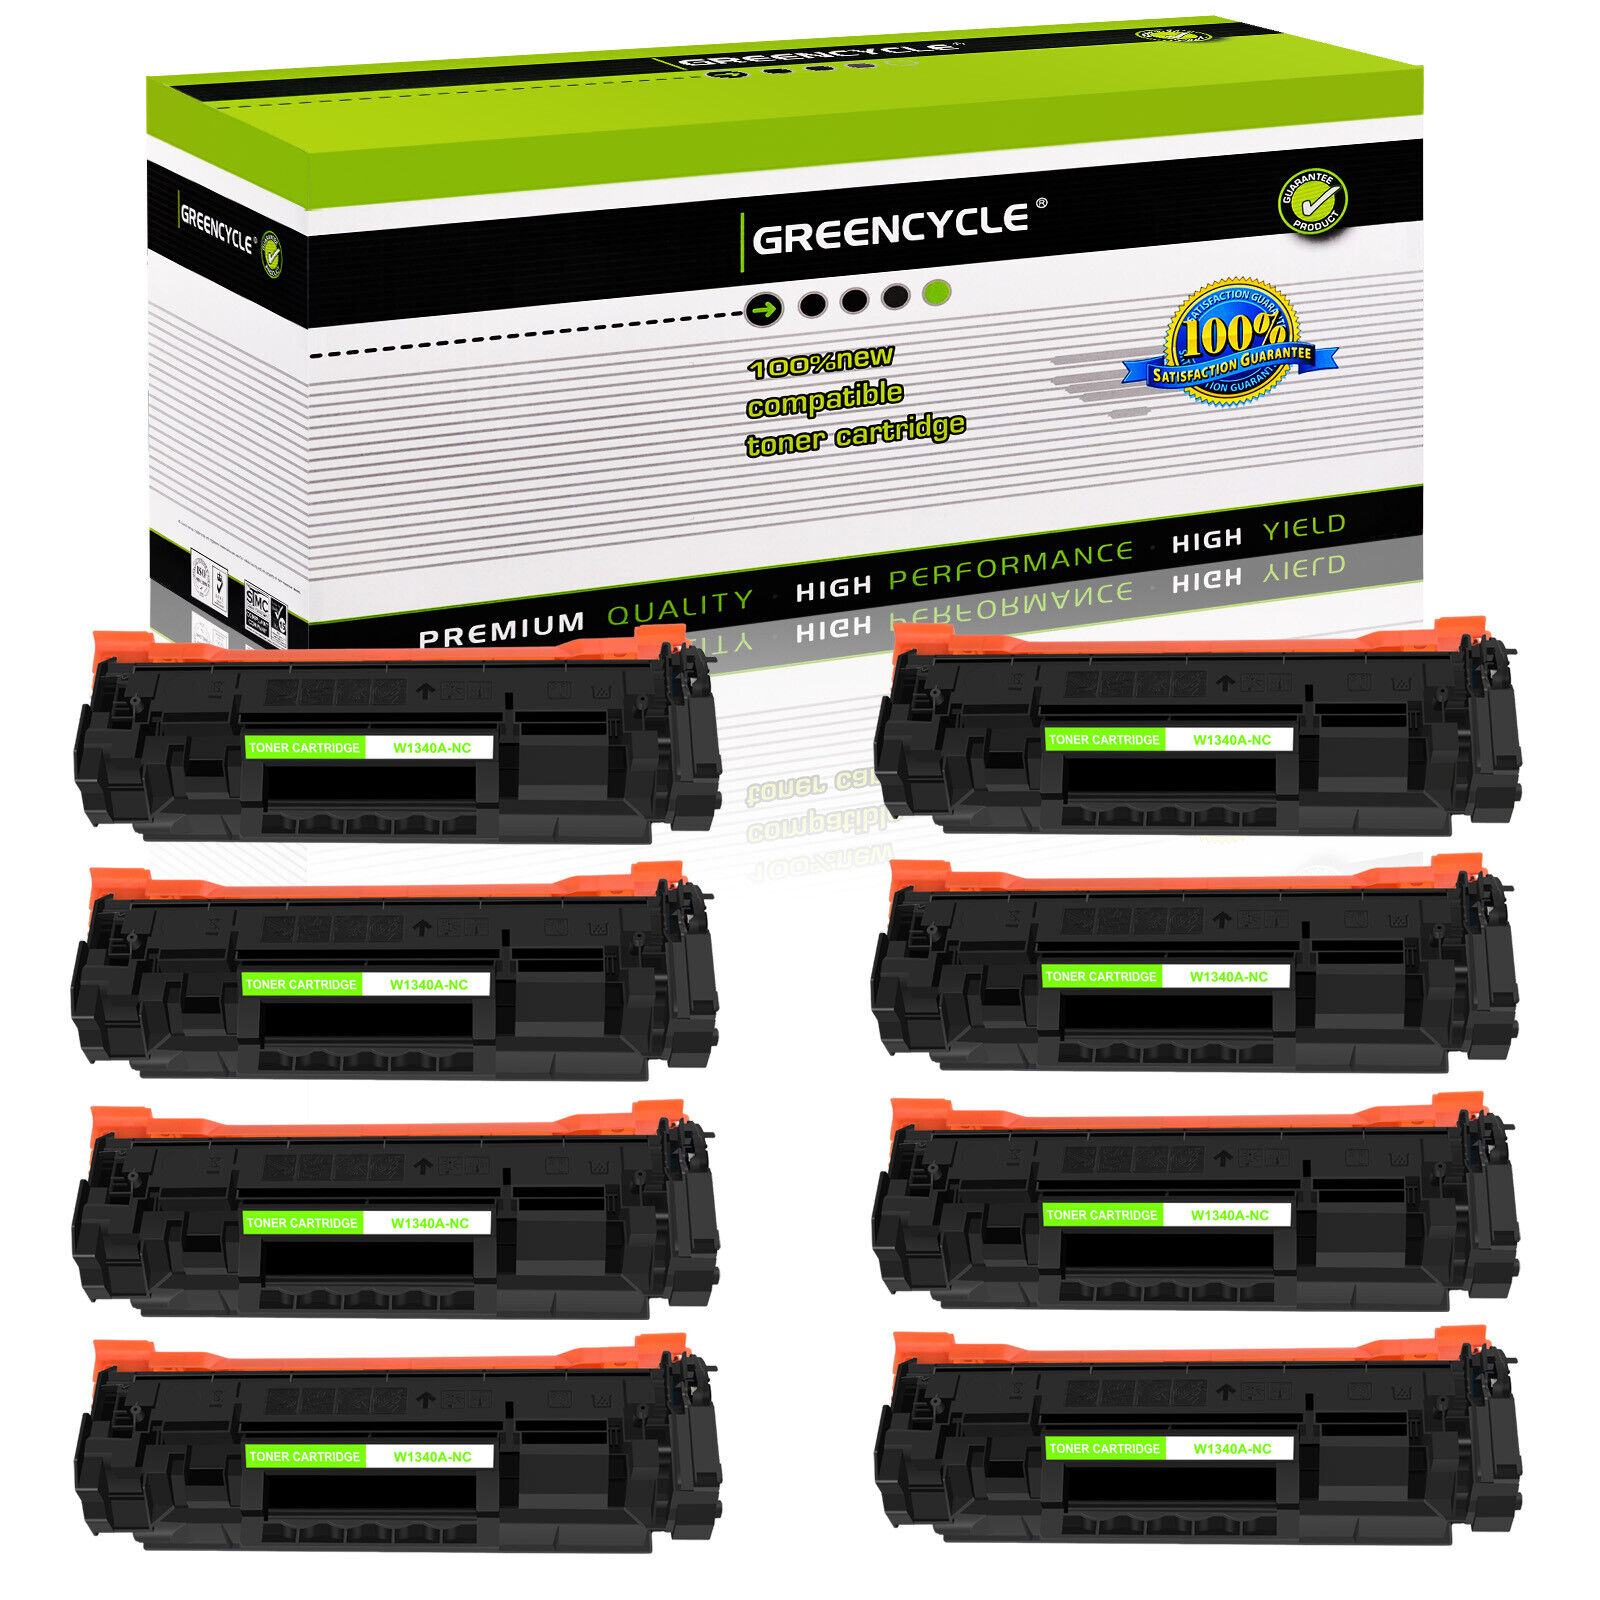 GREENCYCLE 8 Pack W1340A Toner Cartridge For HP 134A M209dwe MFP M234sdn No chip